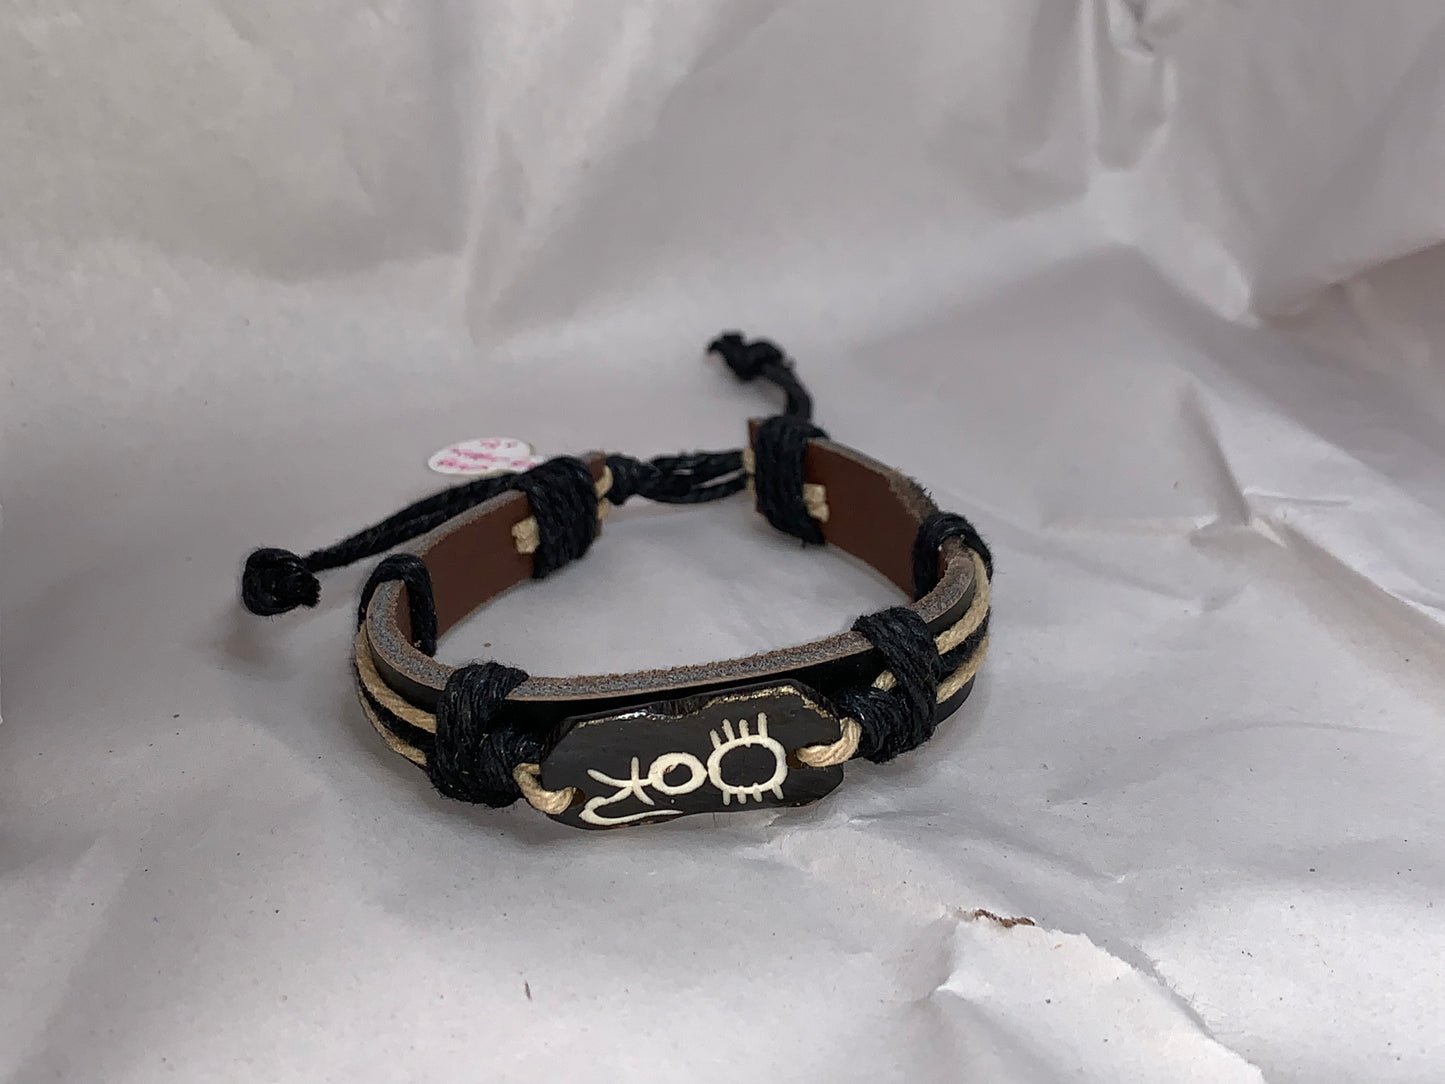 12" Long Leather Bracelet with a Cat design